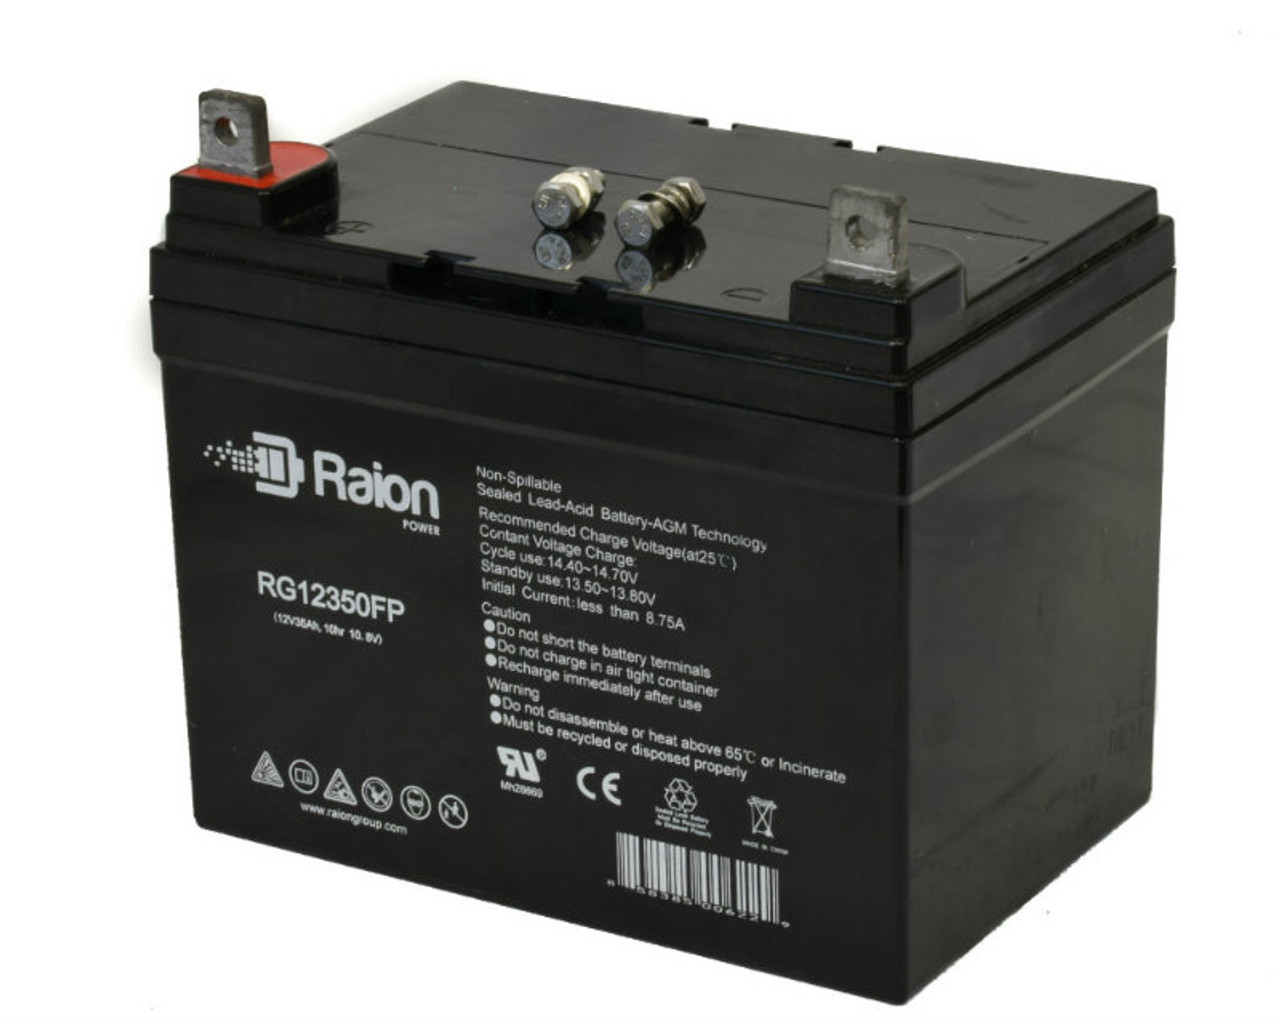 Raion Power Replacement 12V 35Ah RG12350FP Mobility Scooter Battery for Quickie Targa 14 Inch AGM